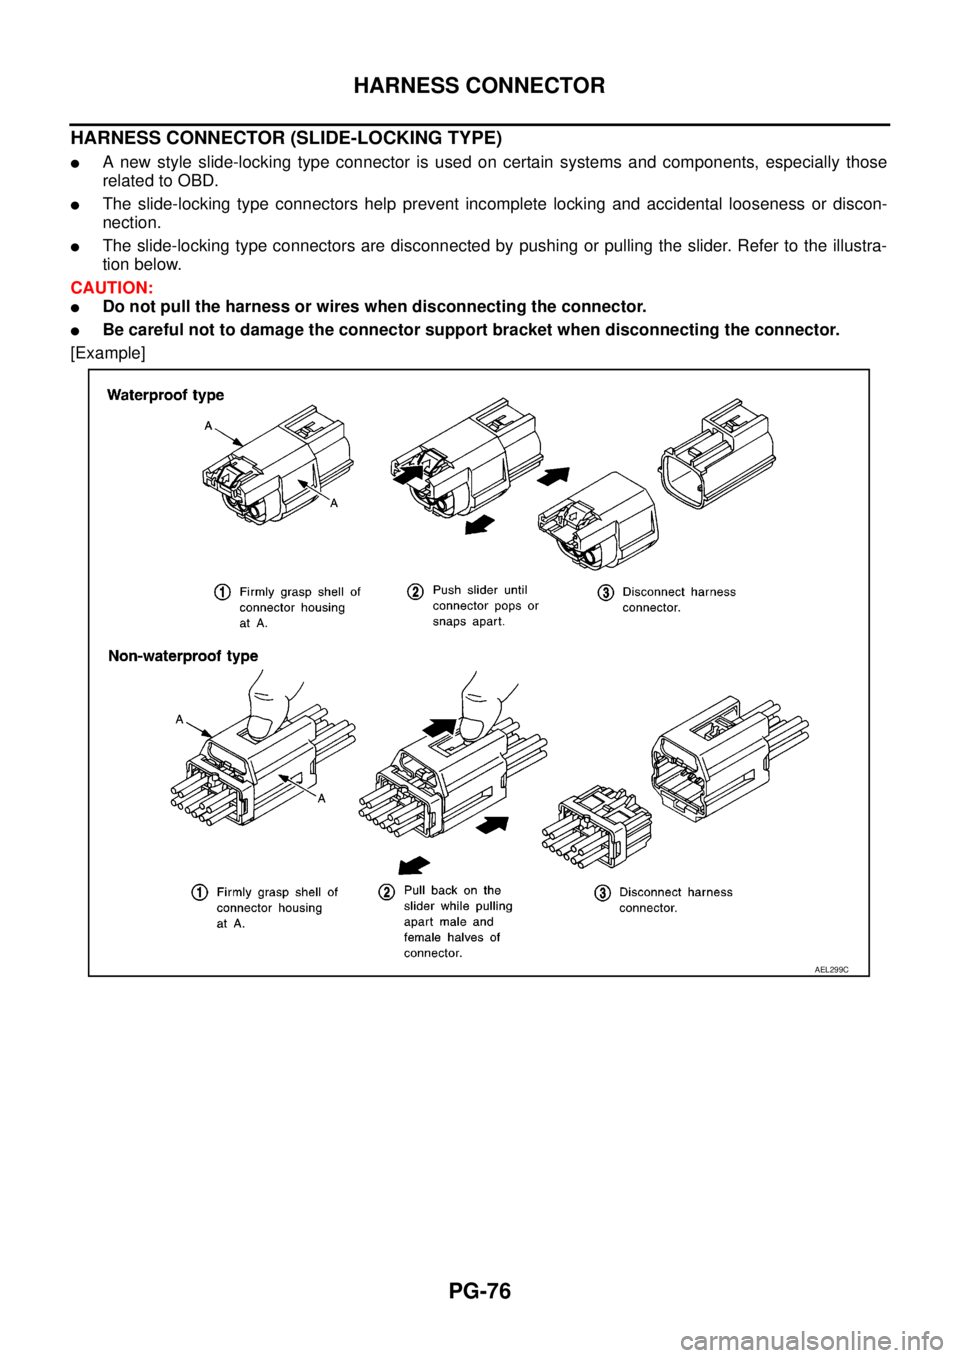 NISSAN NAVARA 2005  Repair Workshop Manual PG-76
HARNESS CONNECTOR
HARNESS CONNECTOR (SLIDE-LOCKING TYPE)
lA new style slide-locking type connector is used on certain systems and components, especially those
related to OBD.
lThe slide-locking 